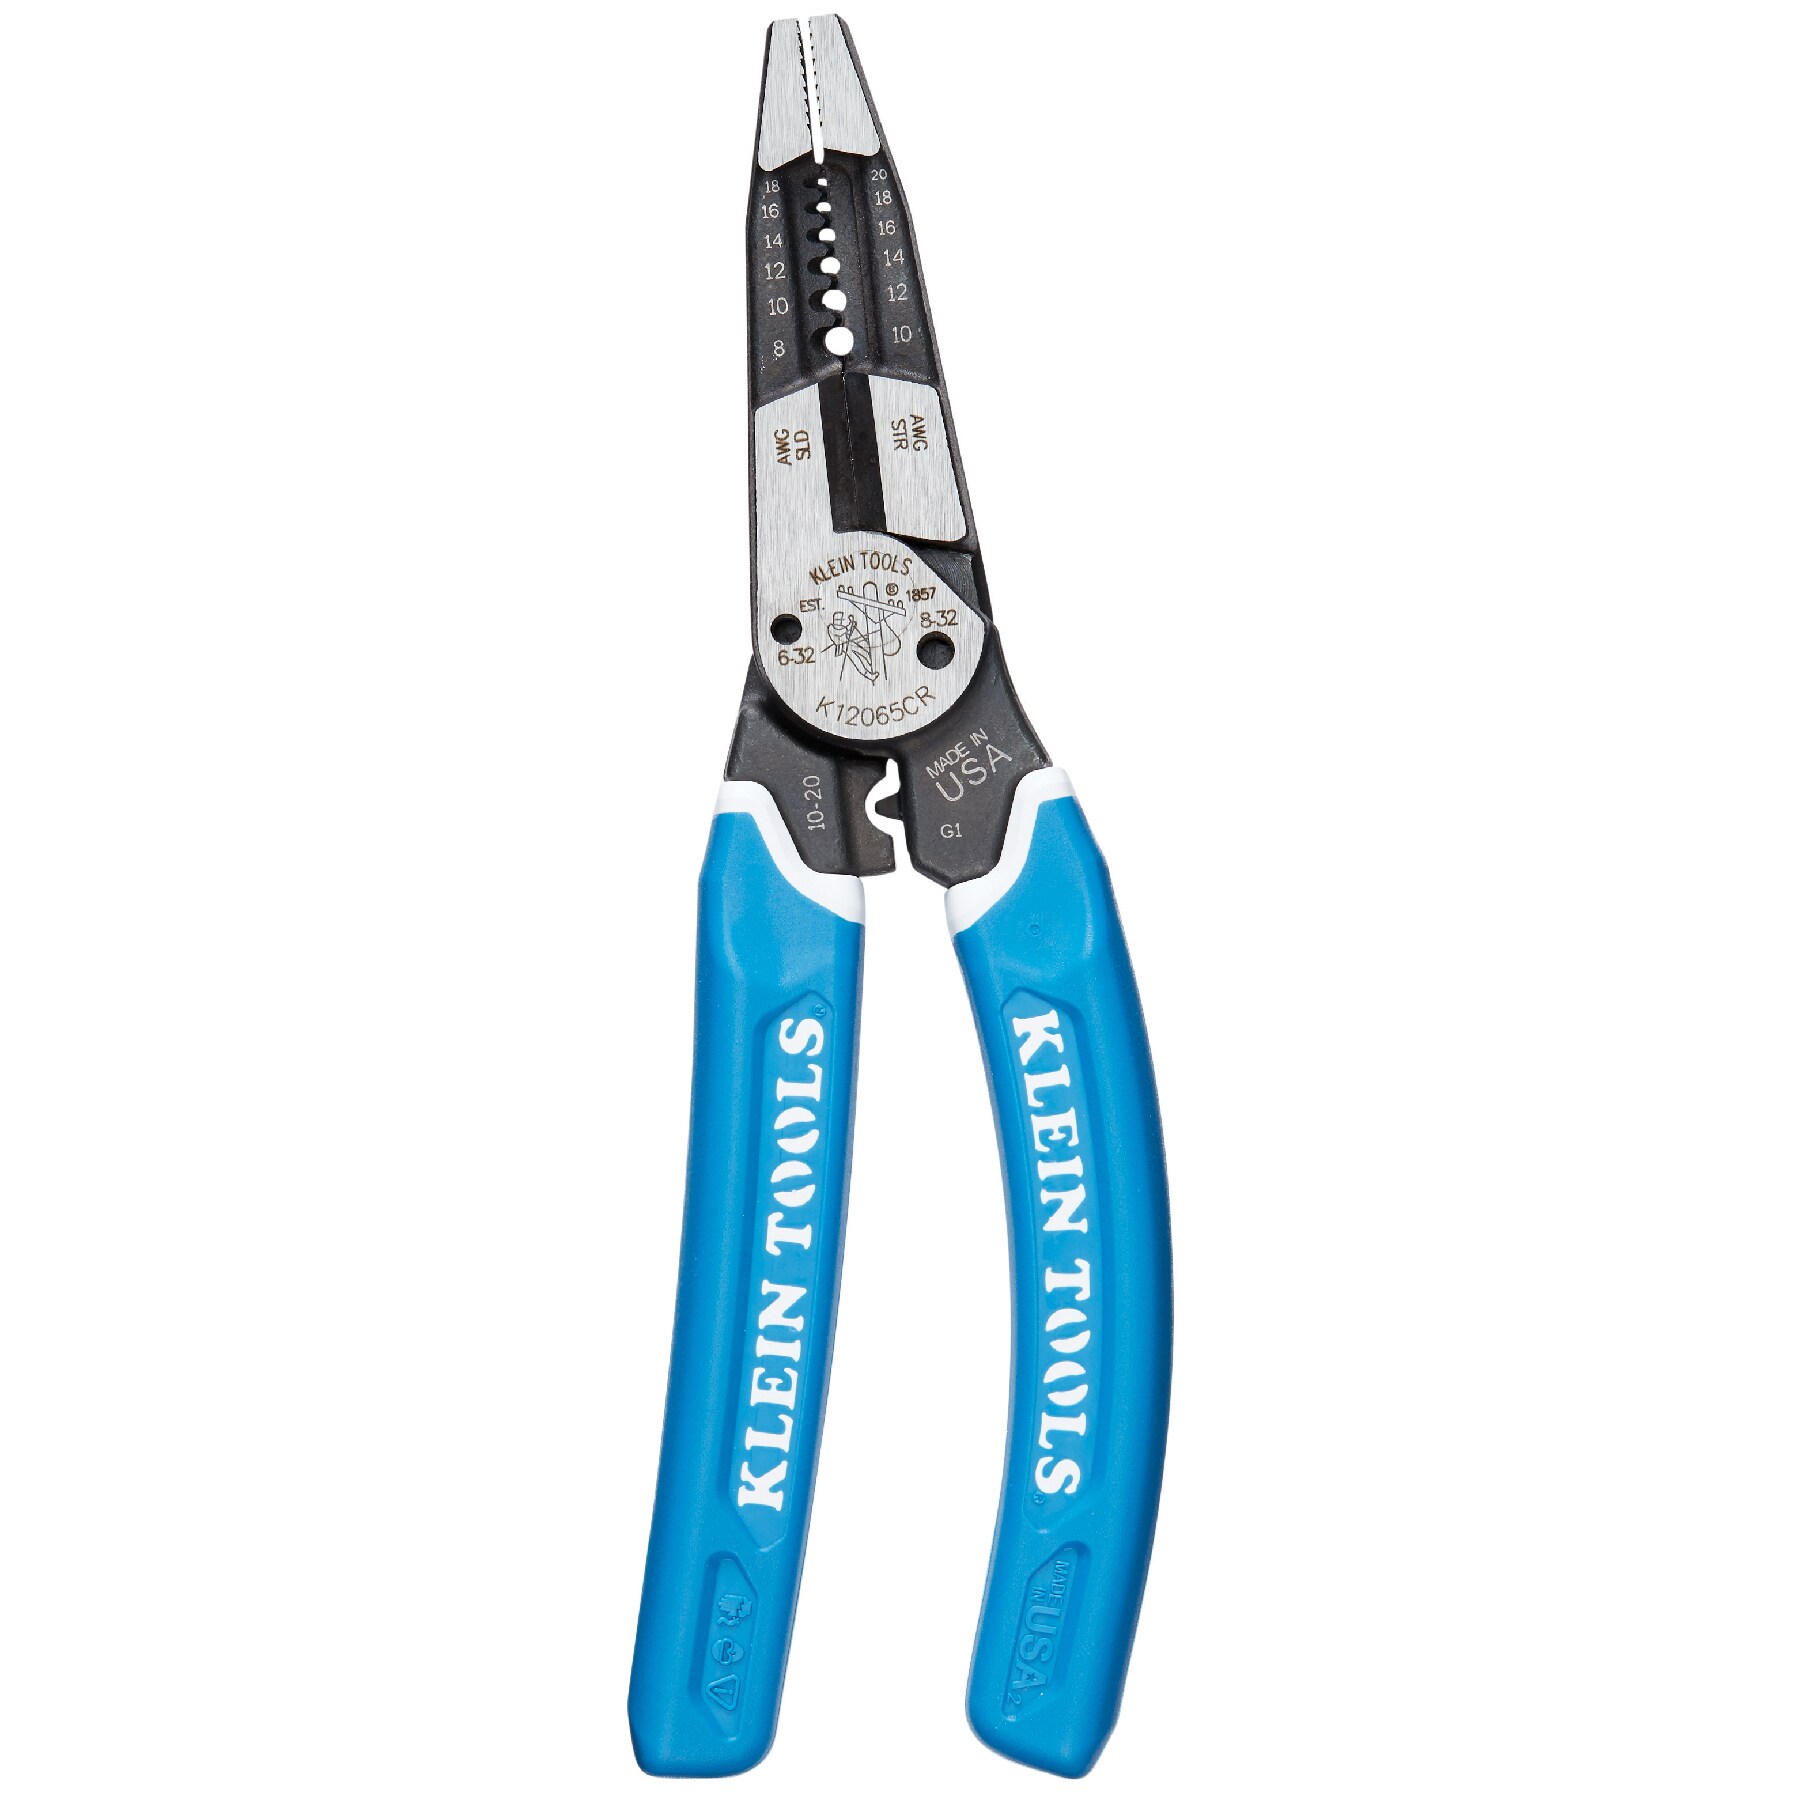 Klein Tools Ratcheting Crimper, 10-22 AWG - Insulated Terminals